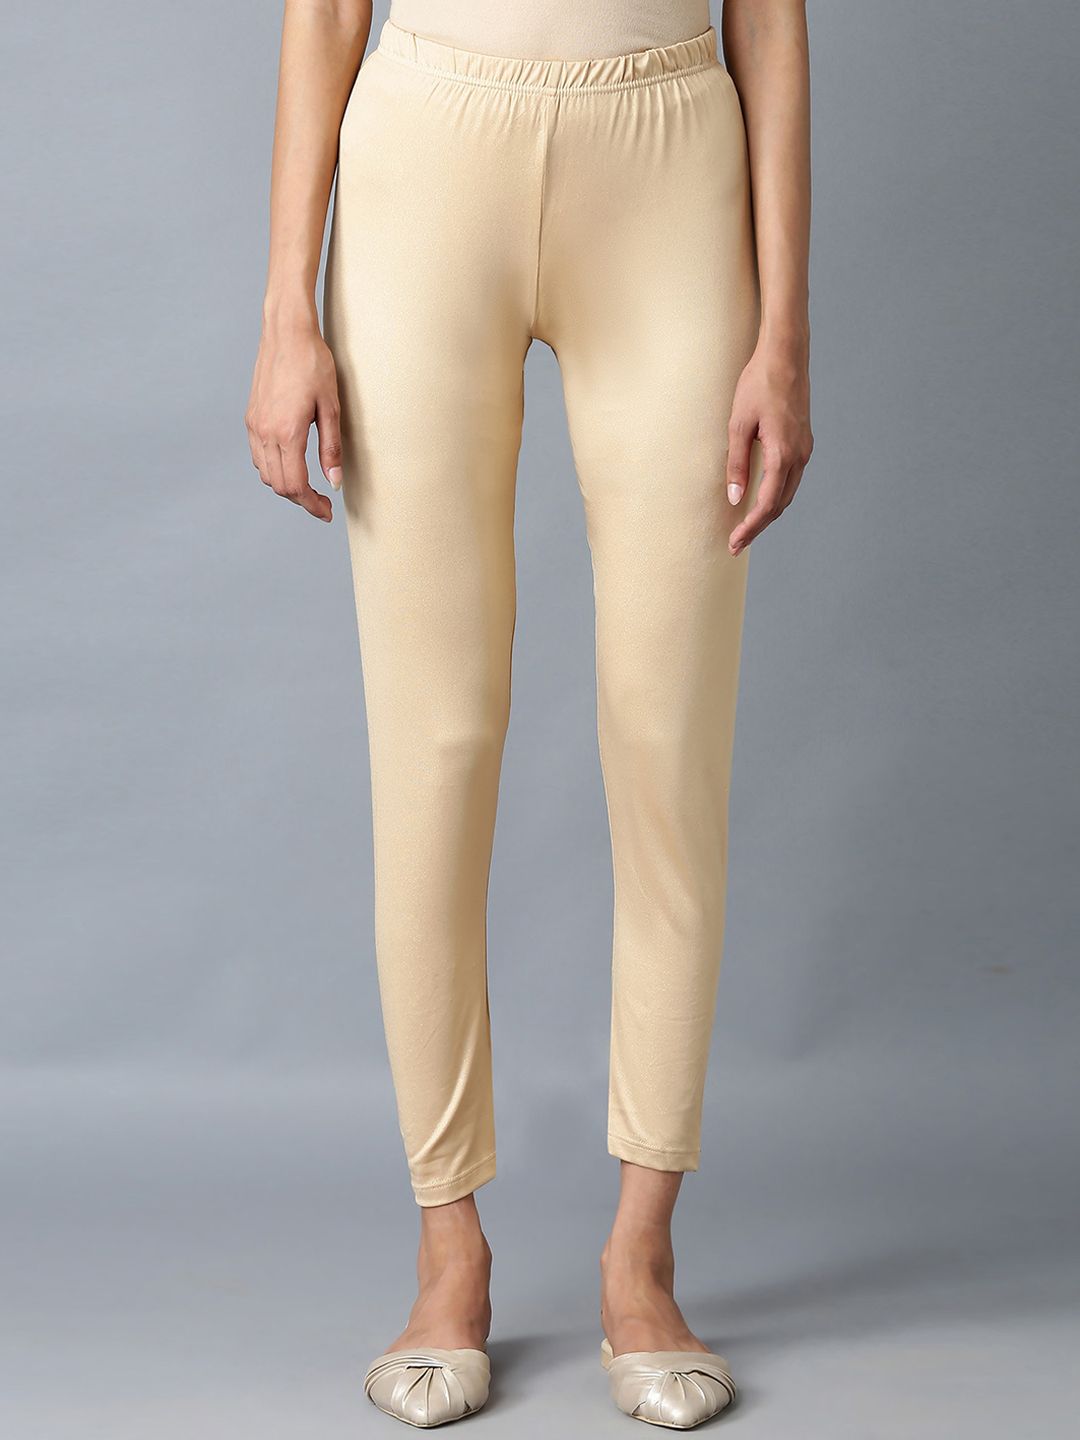 elleven Women Solid Rose Gold Cropped Leggings Price in India